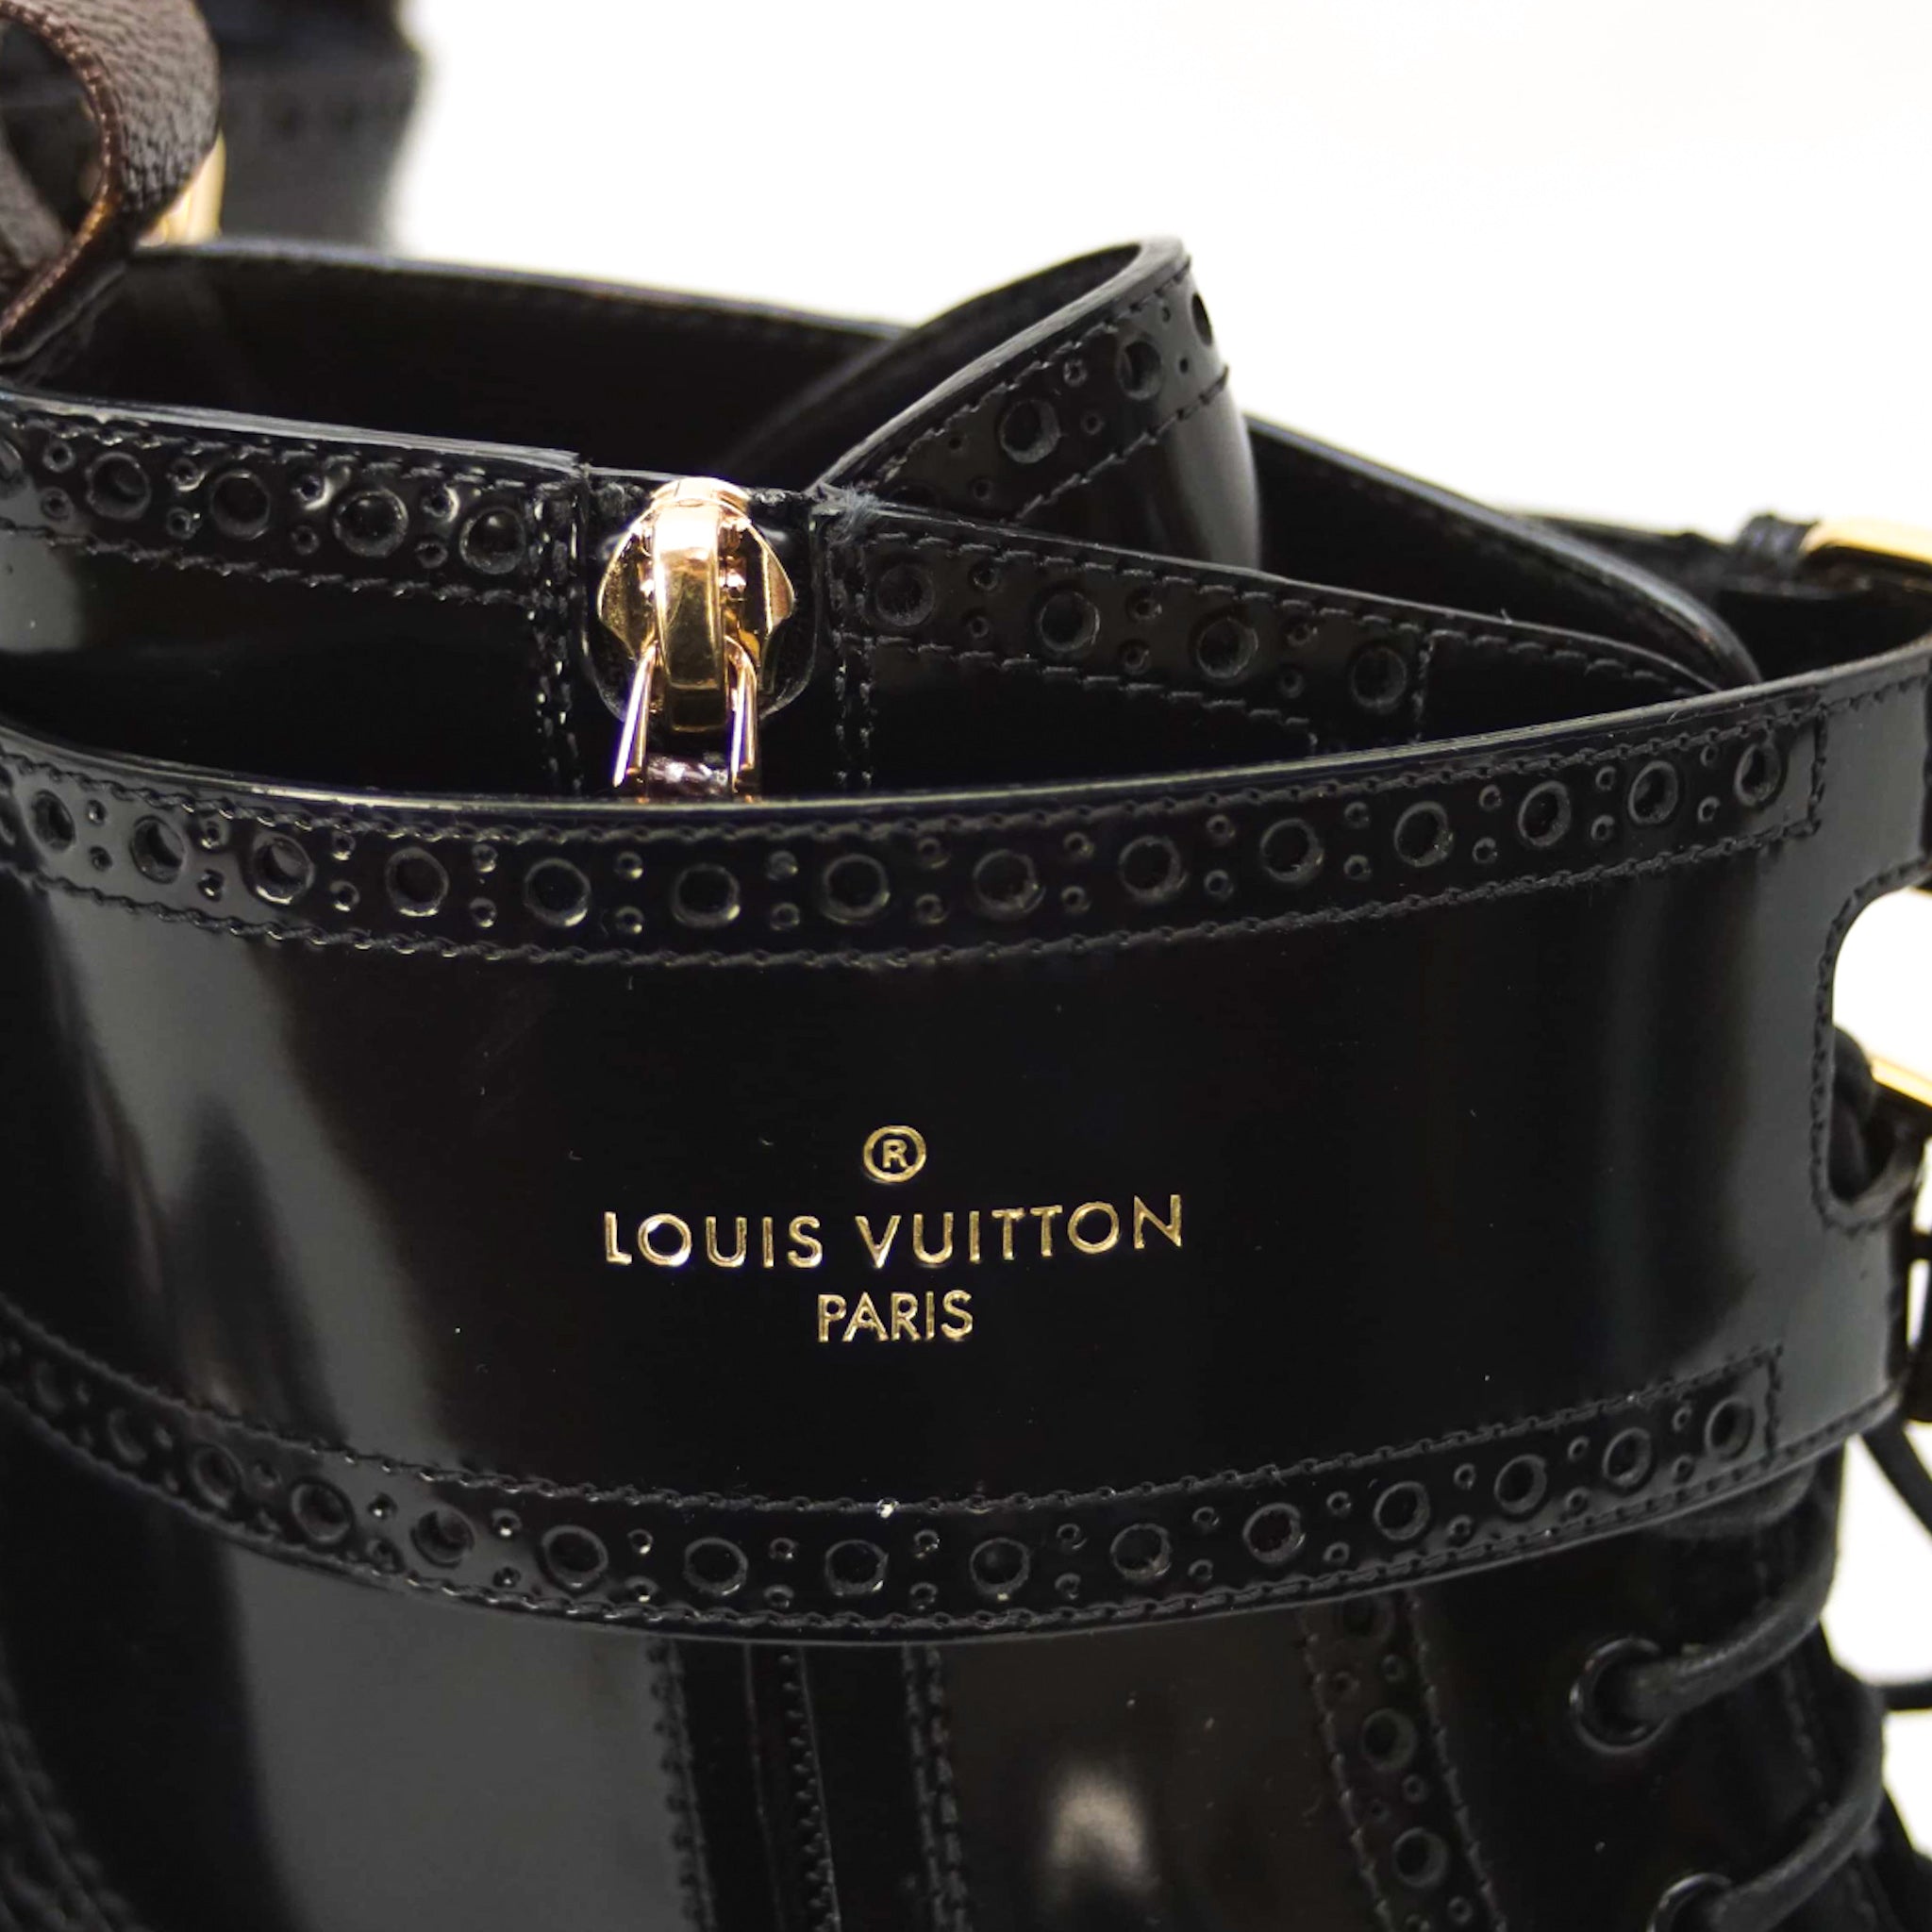 Heeled Boots at Louis Vuitton PFW Show – Rvce News - Брендовий